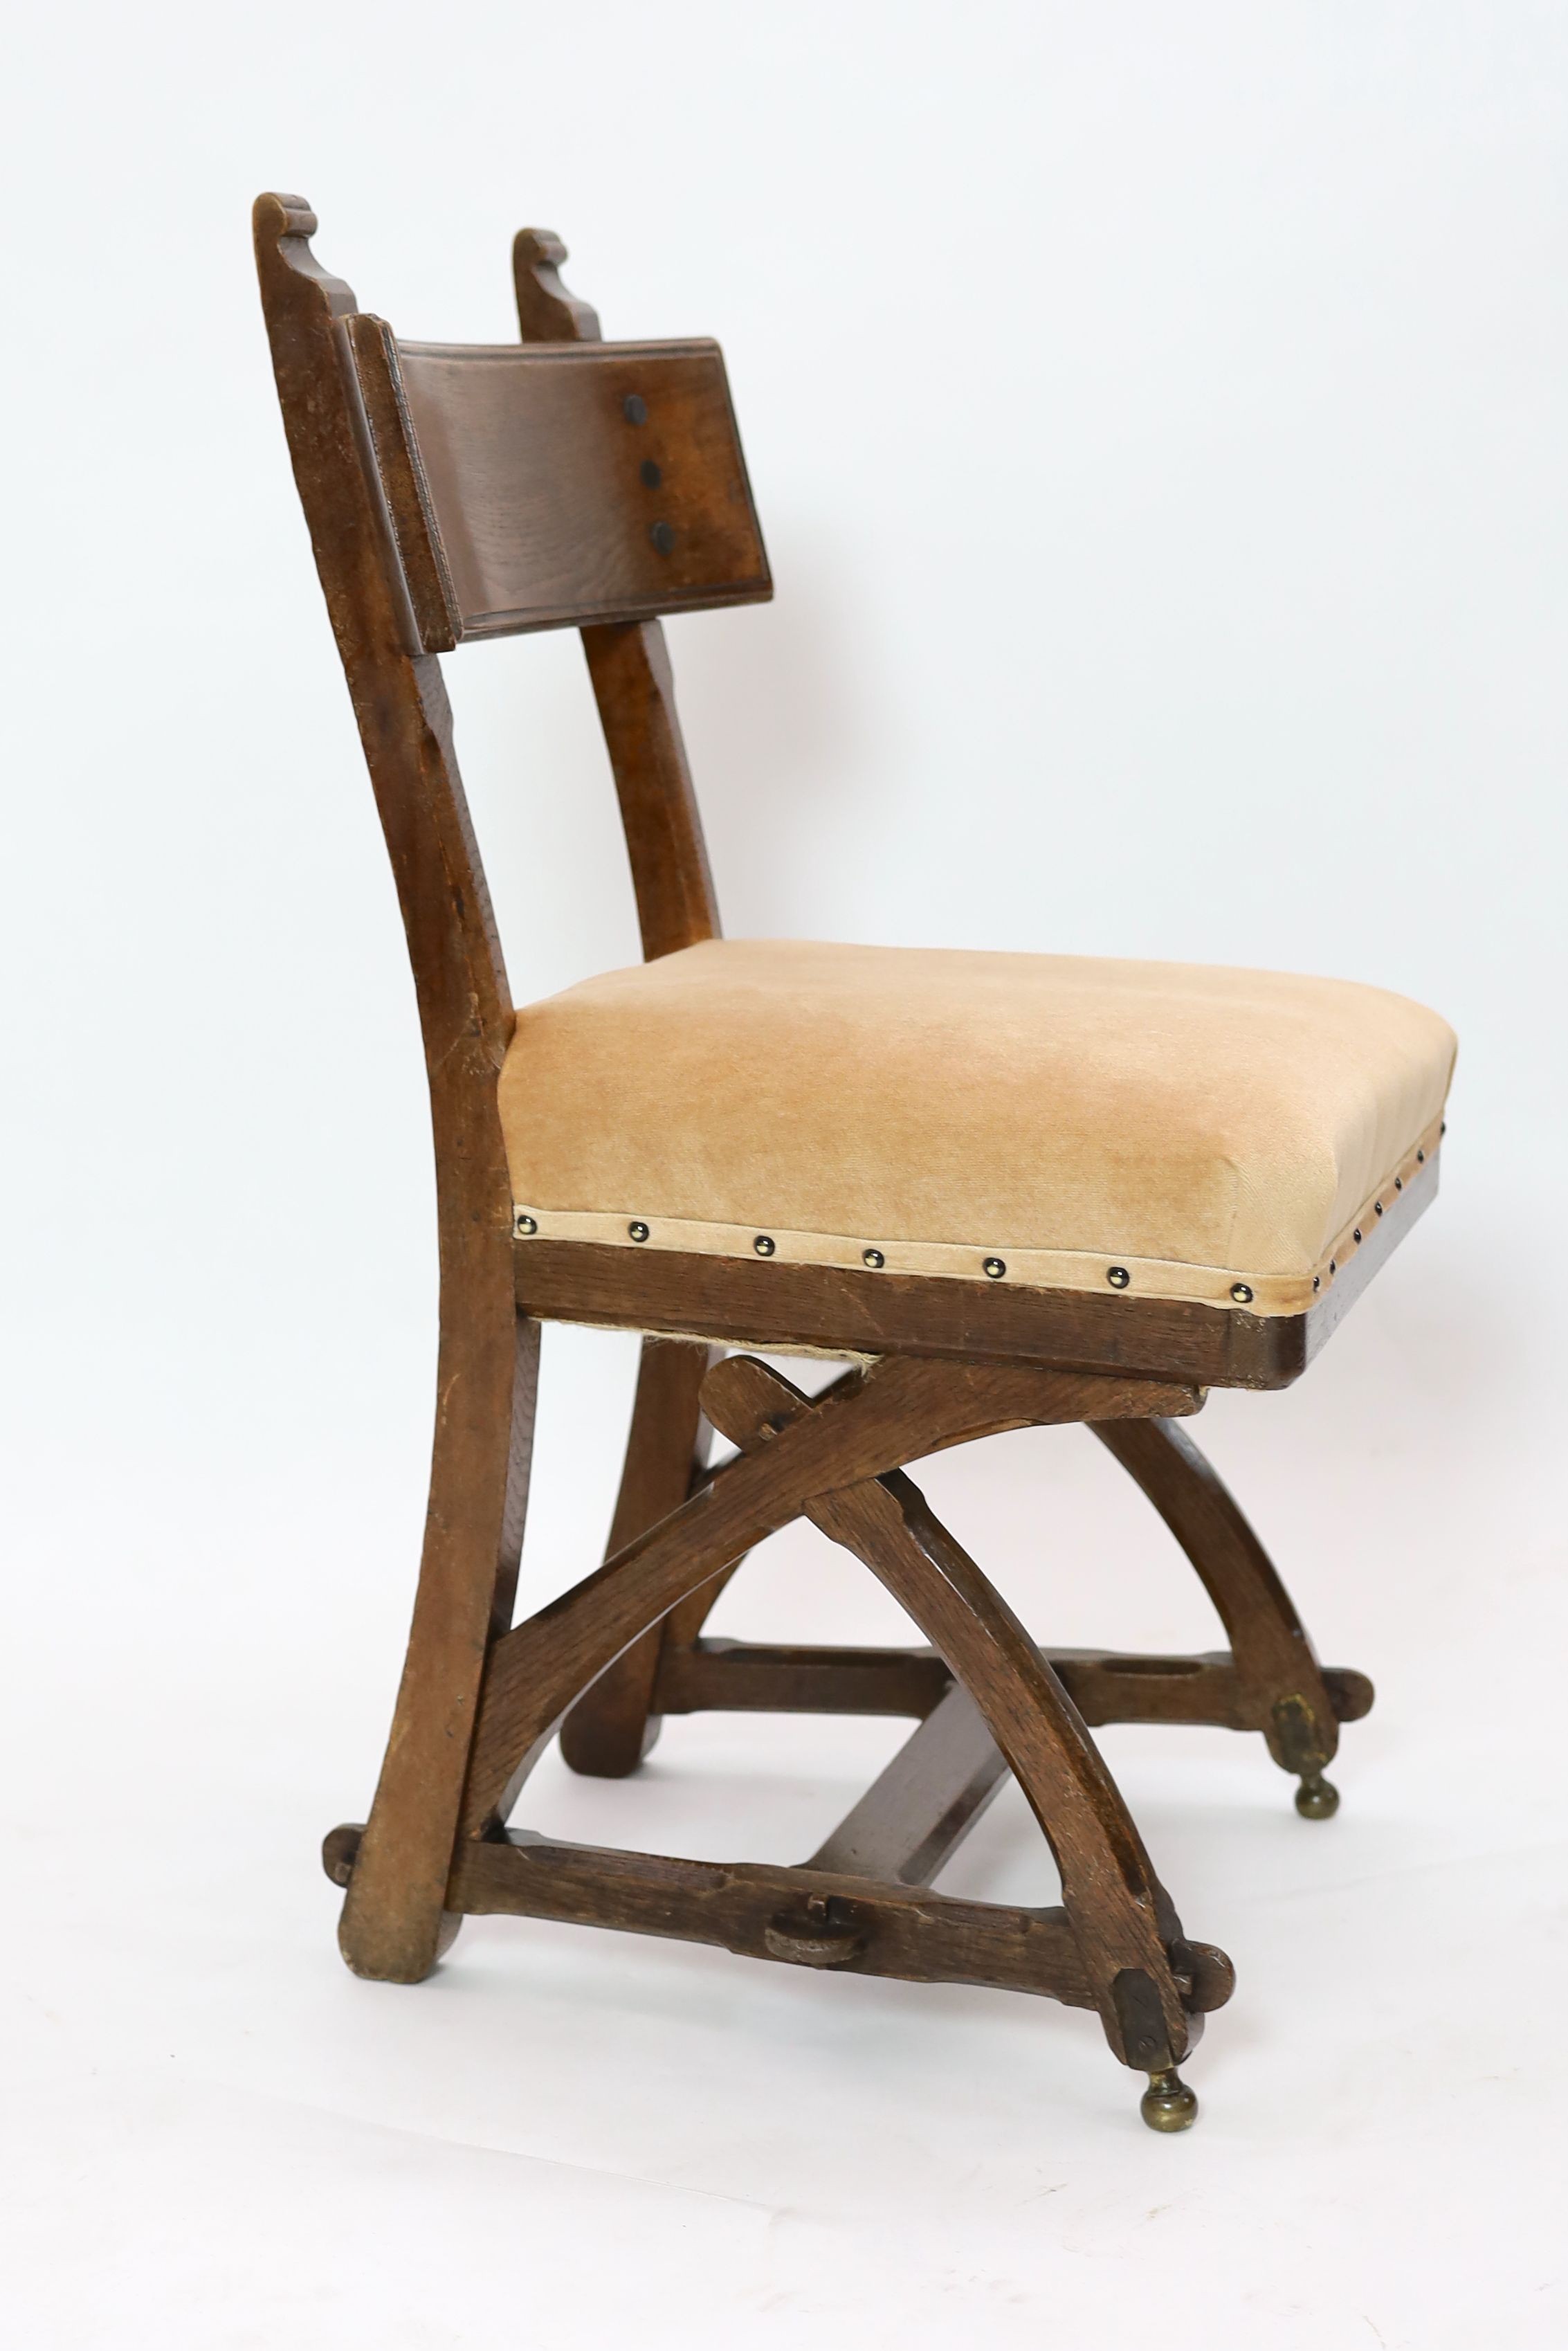 A Victorian reformed gothic oak dining chair designed by Edward Welby Pugin, c.1864, W. 50cm. D. 48cm. H. 84cm.